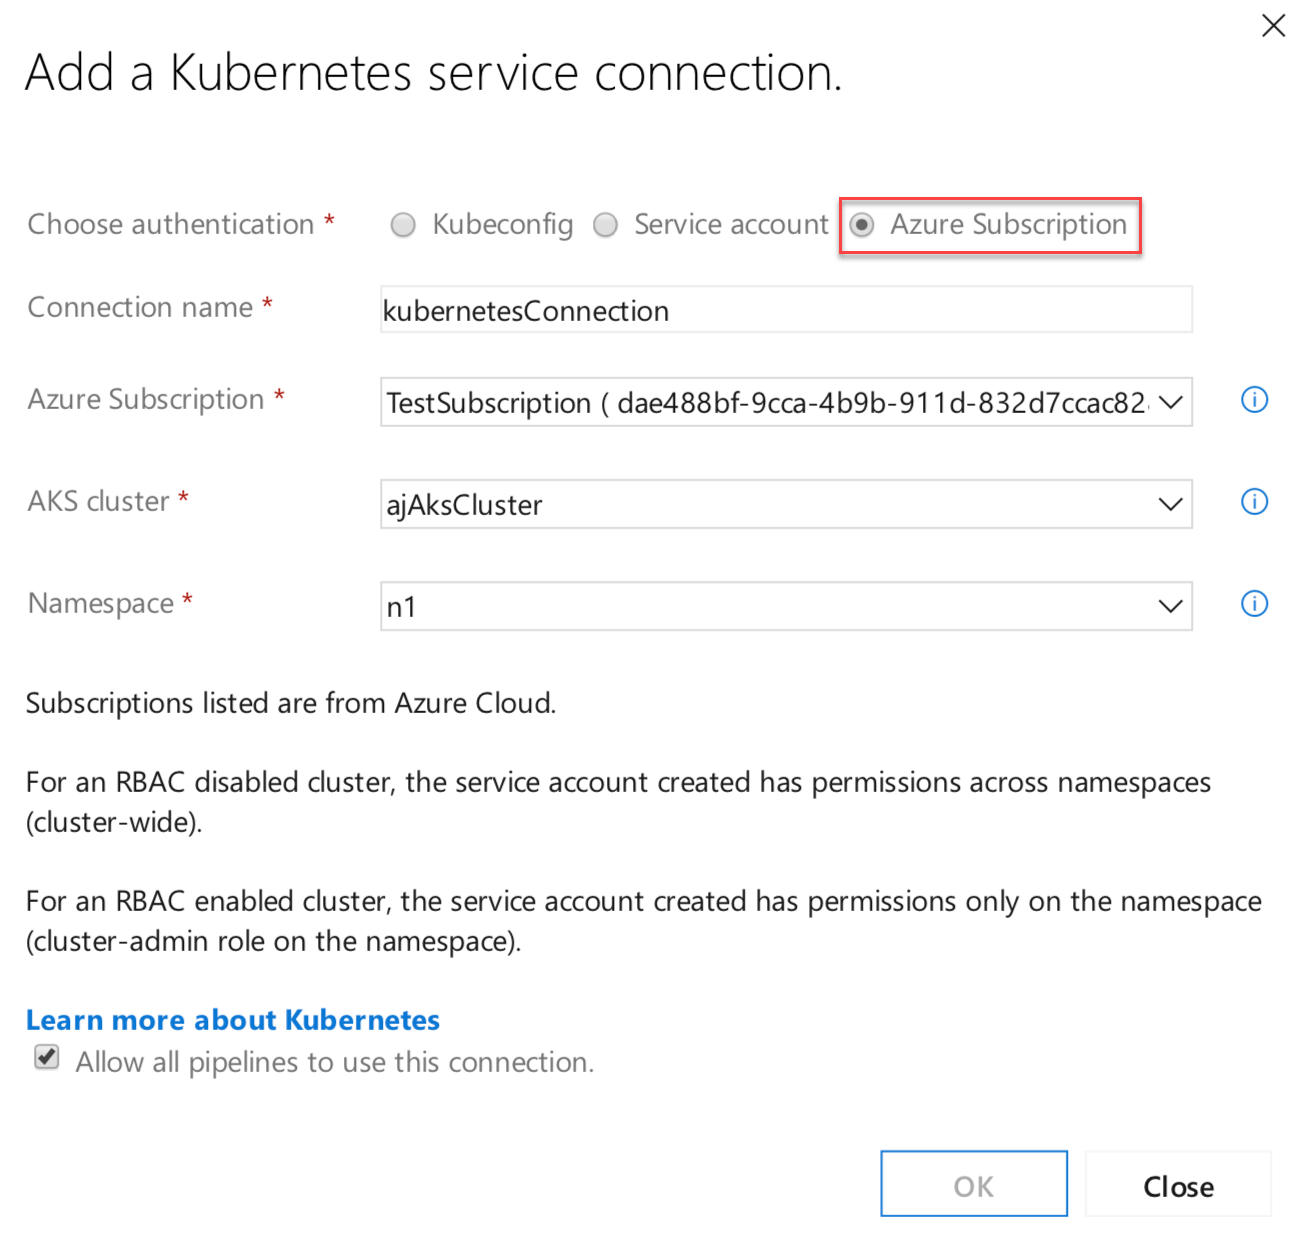 New Azure subscription option in Kubernetes service connection.